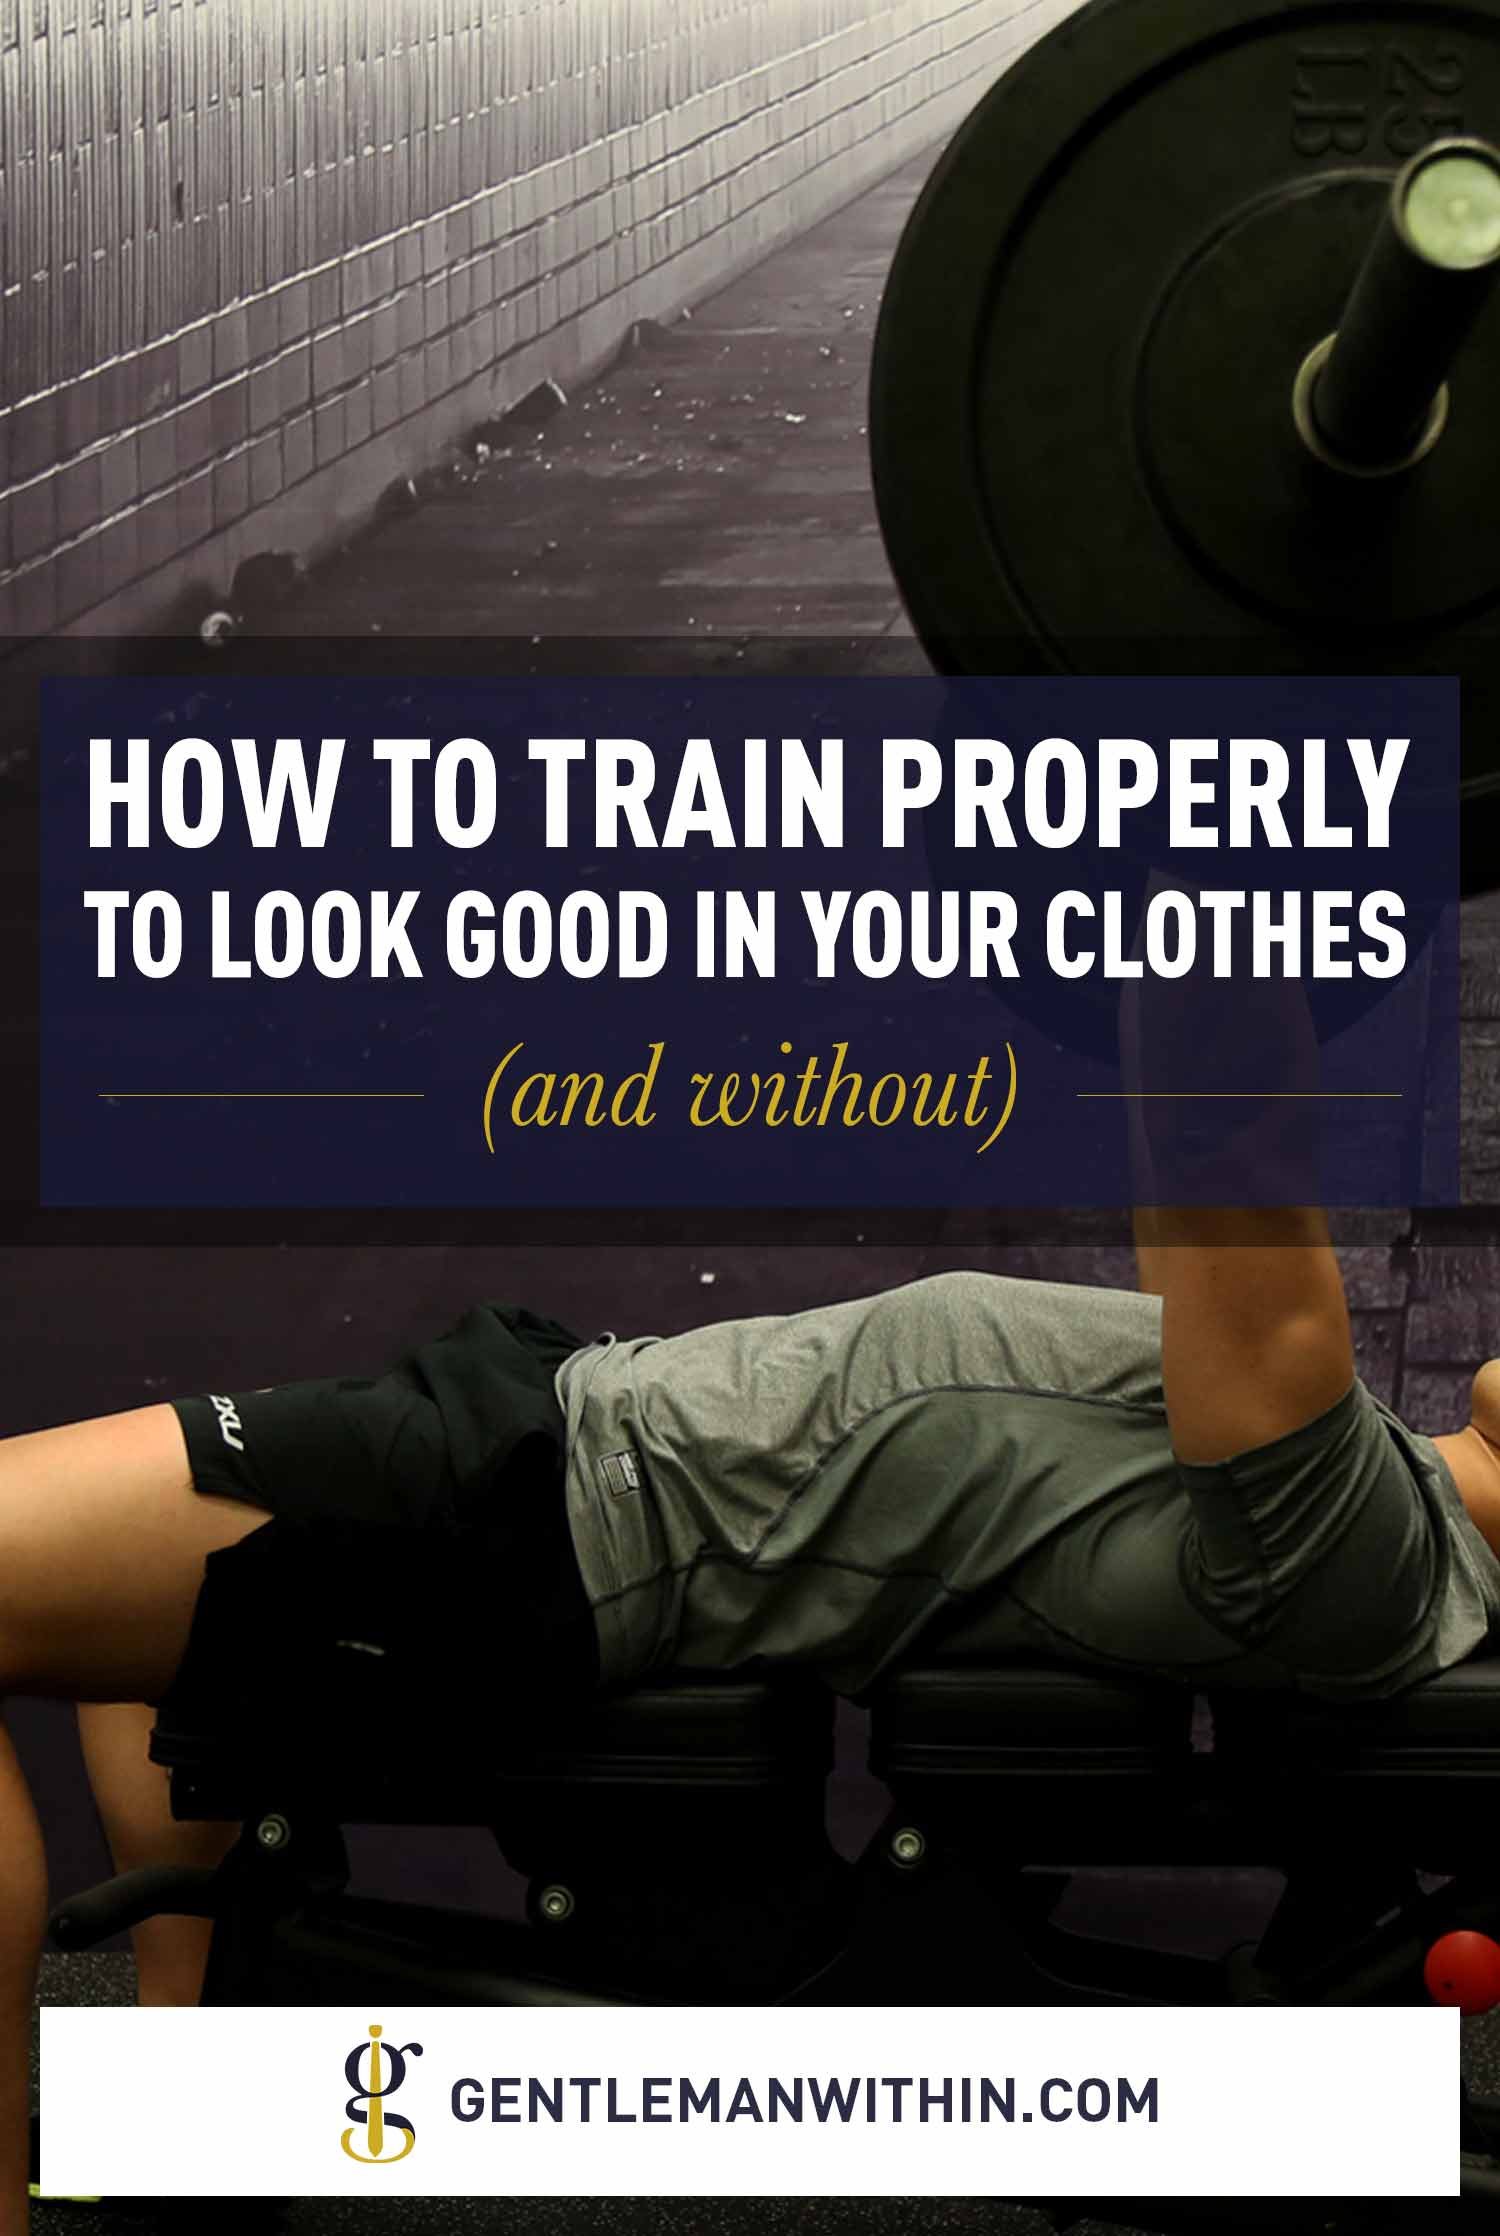 How To Work Out Properly To Look Good In Your Clothes | GENTLEMAN WITHIN